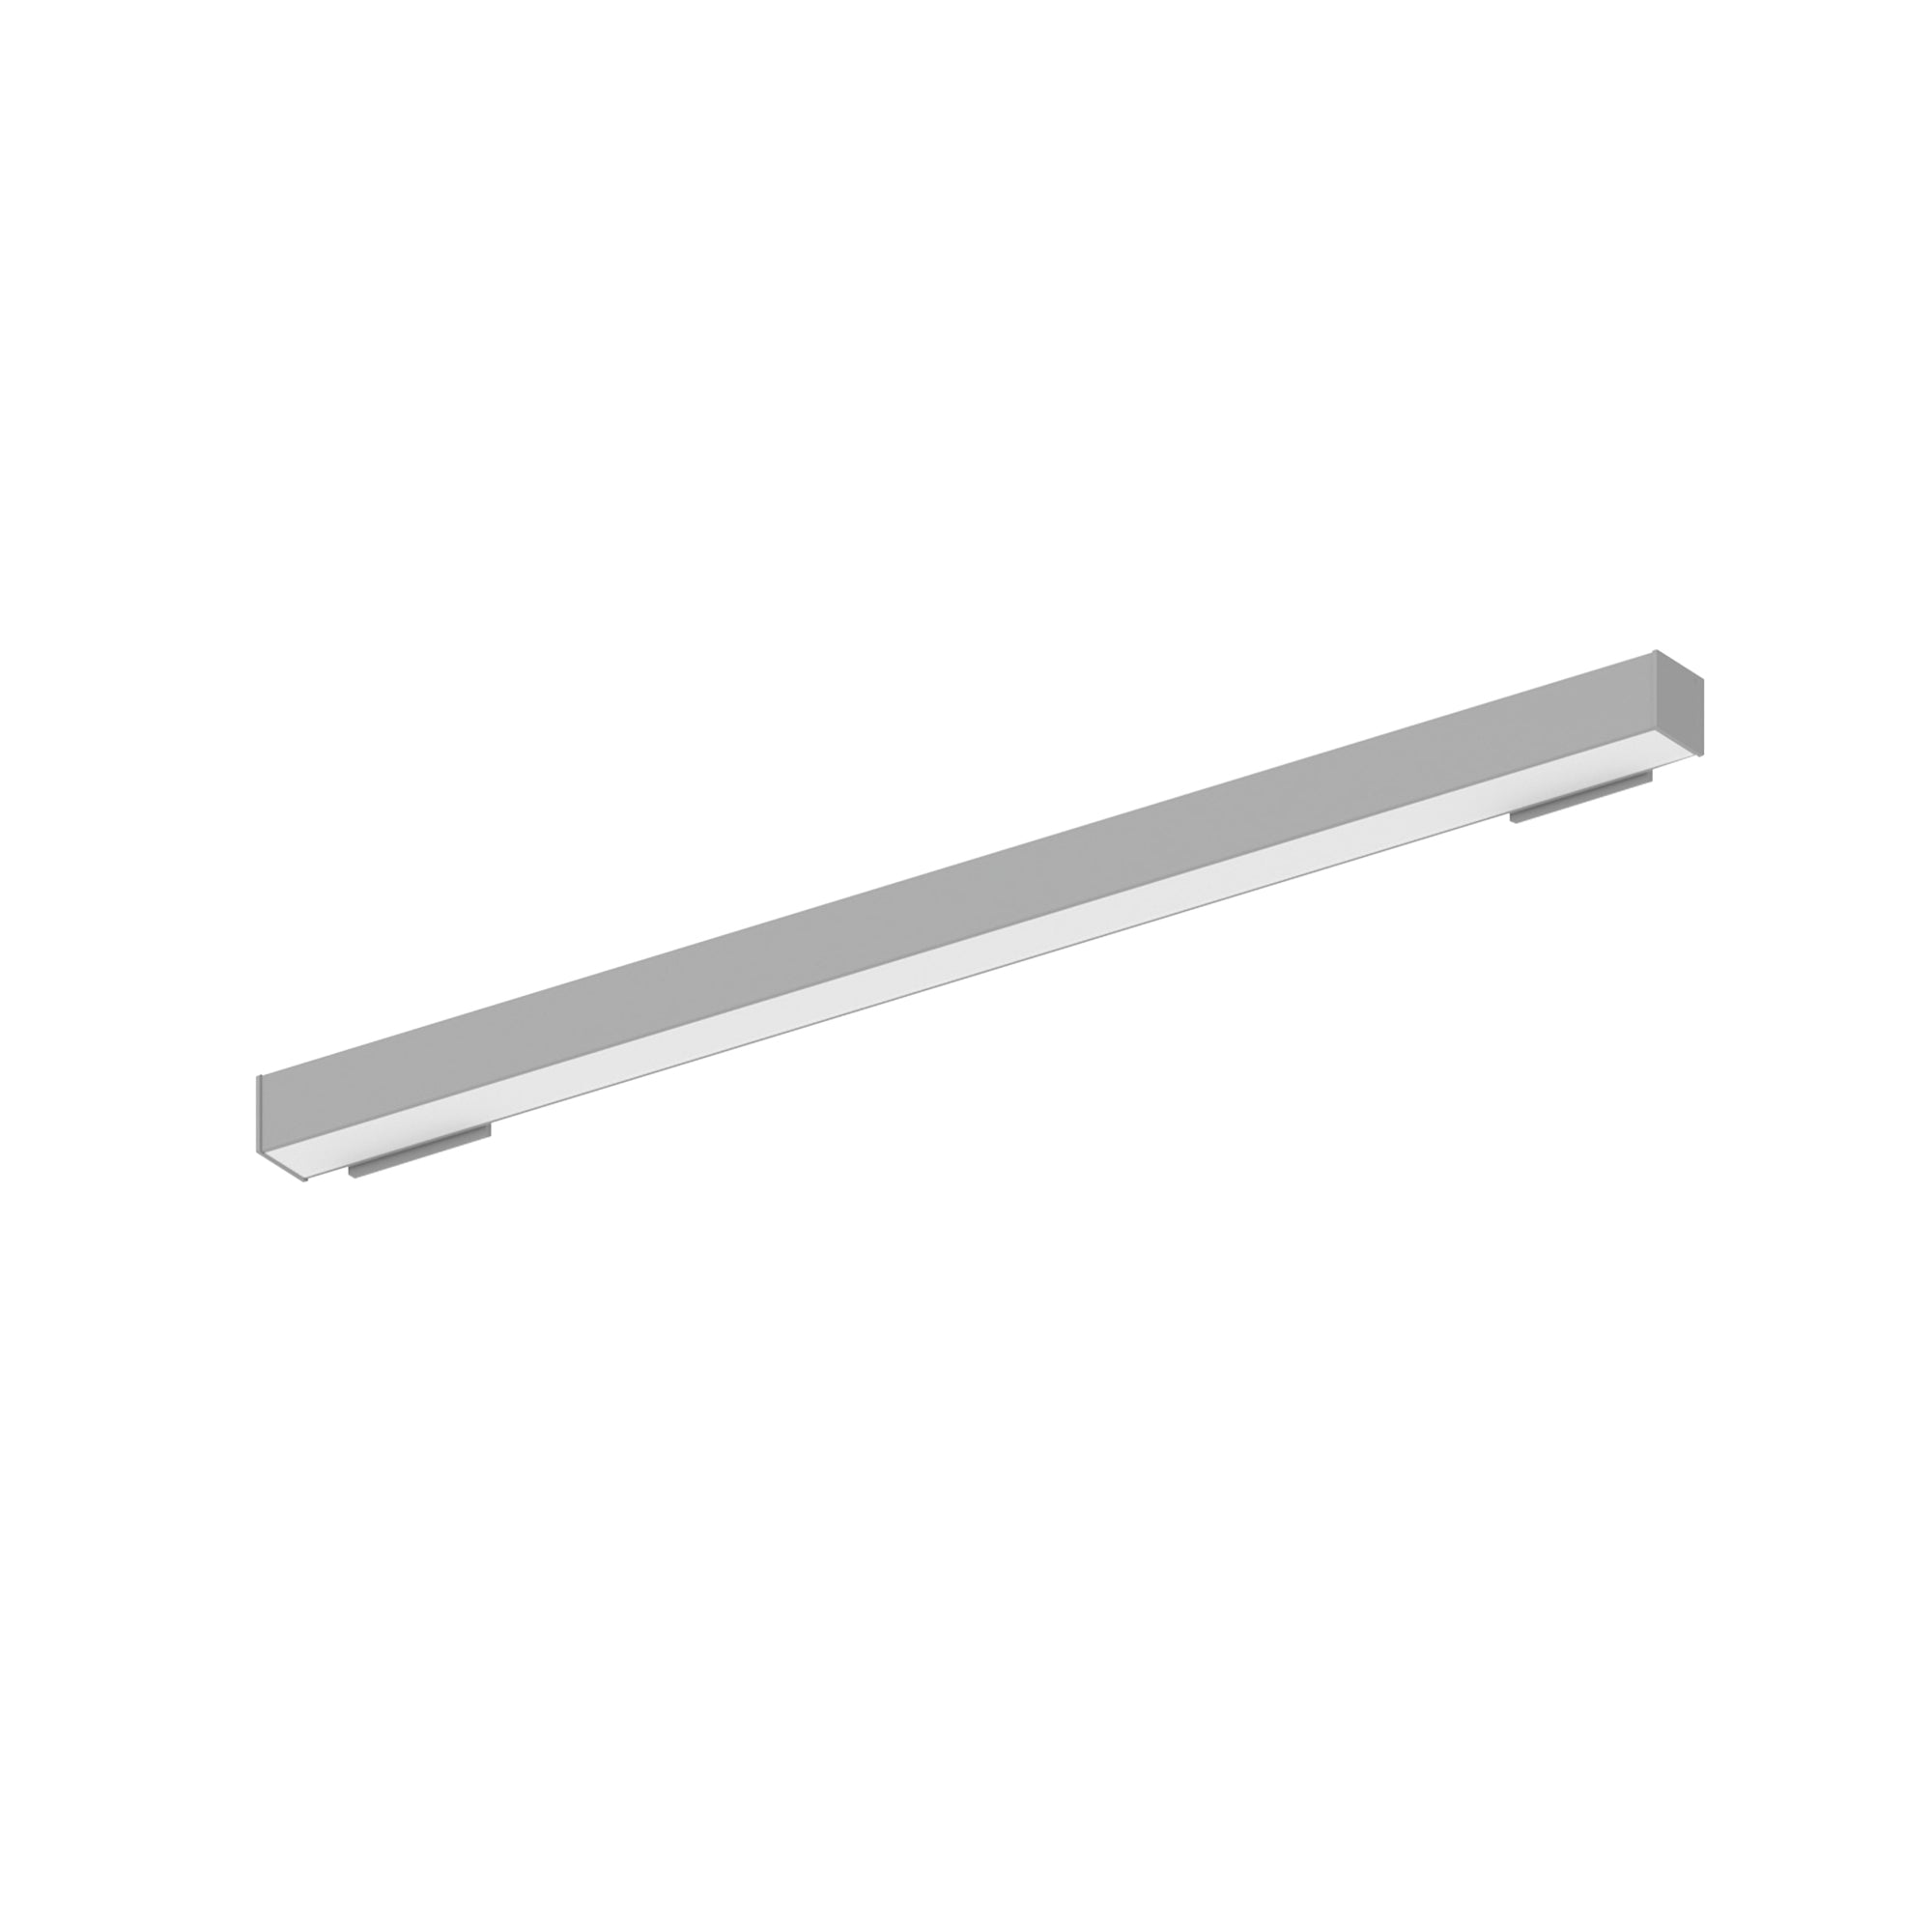 Nora Lighting NWLIN-41040A/L2-R2P - Linear - 4' L-Line LED Wall Mount Linear, 4200lm / 4000K, 2 Inchx4 Inch Left Plate & 2 Inchx4 Inch Right Plate, Right Power Feed, Aluminum Finish